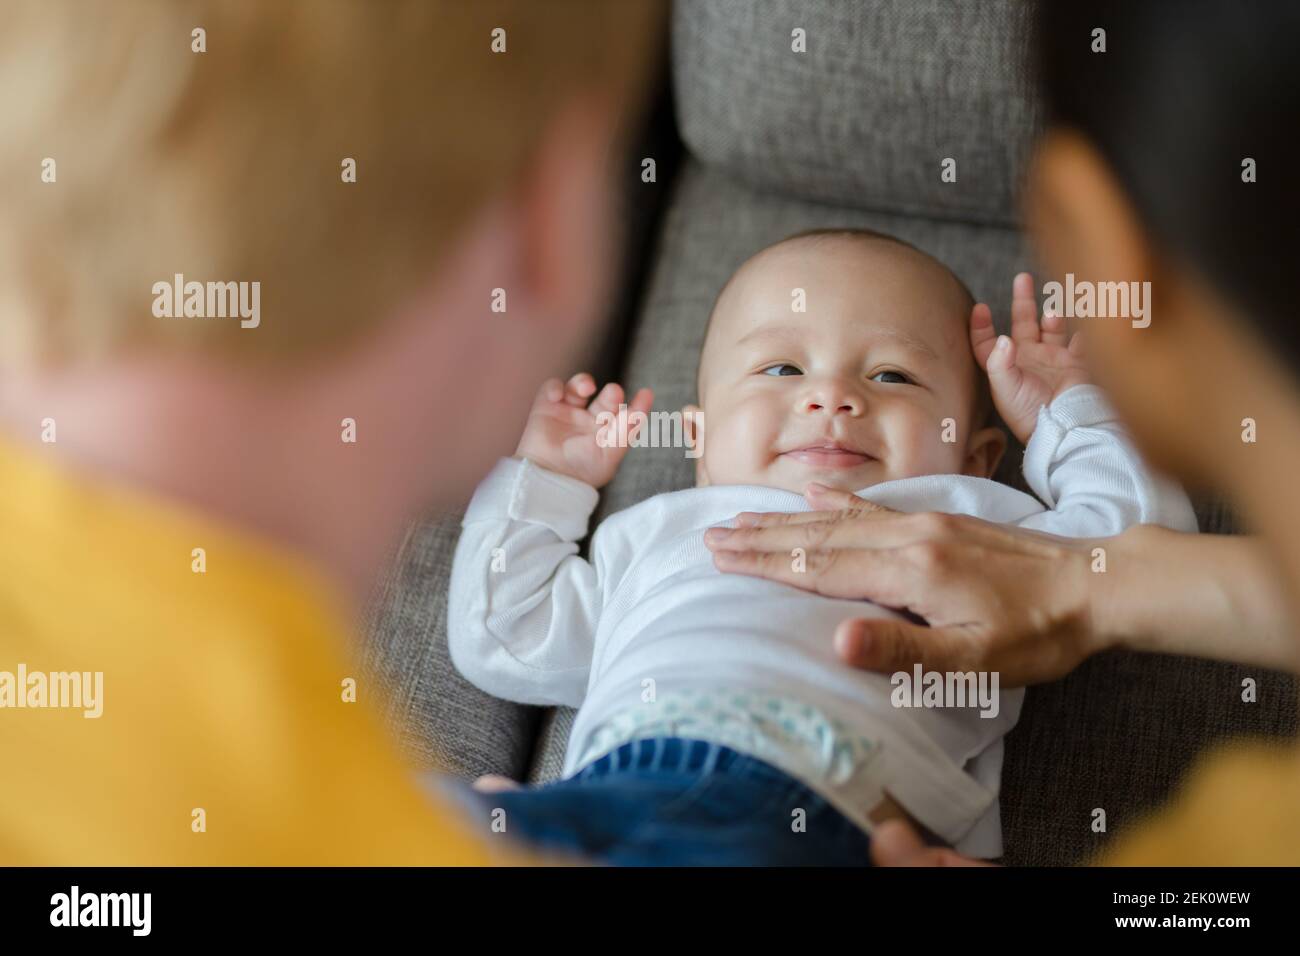 happy mother, father with baby playing together at home. Family, parent and baby concept. Stock Photo